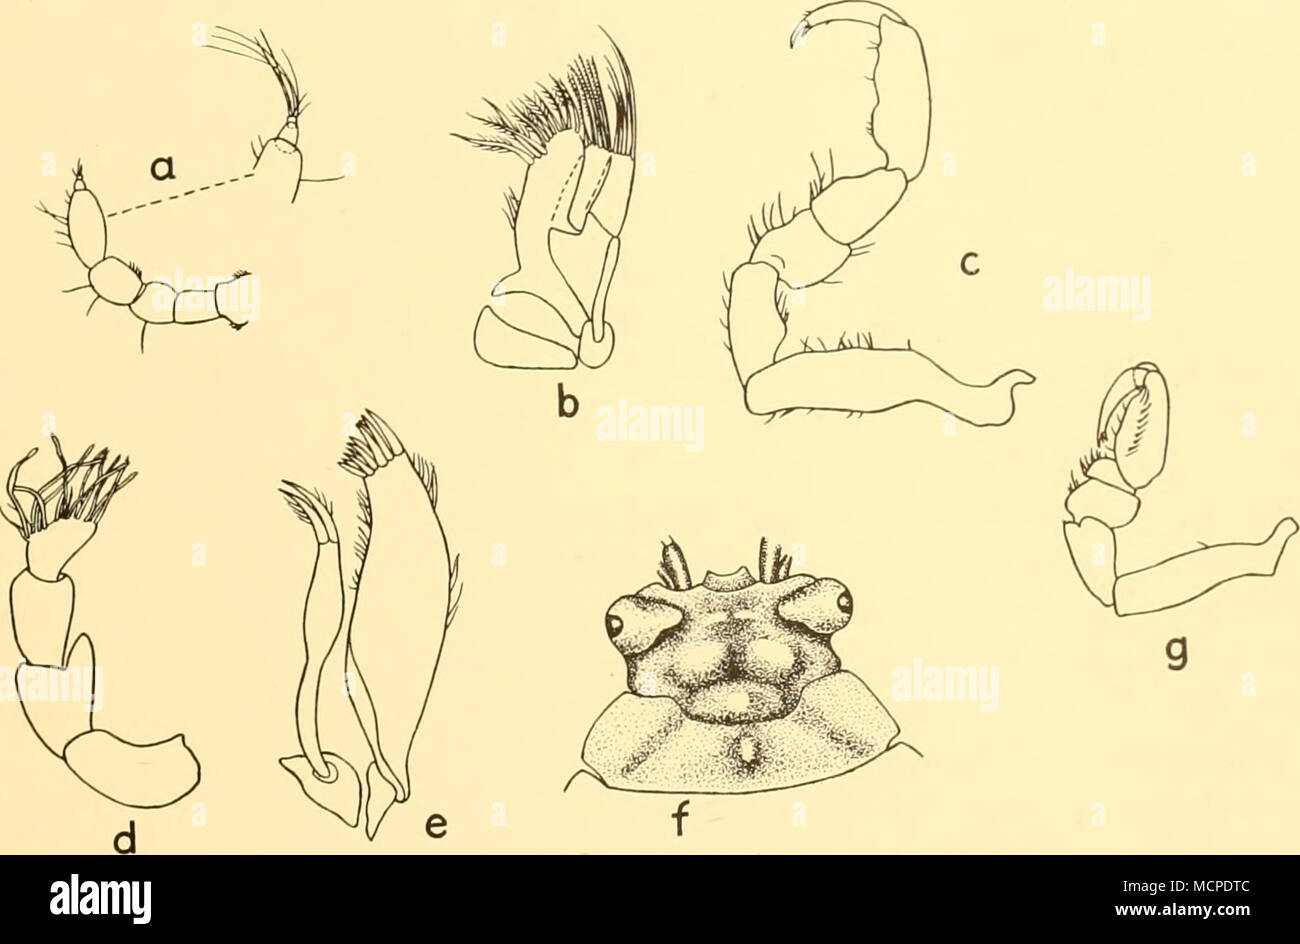 . Text-fig. 9. Edotta oculopetiolata sp.n. (a) Antenna, x 22. (6) Left maxilla, x 42. (c) Fifth pereiopod, x 15. ((/) Antennule, J, X 22. (e) Left maxilla, x 42. (/) Head and first pereion segment, x 12. (g) First pereiopod, x 15. The antenna (Text-fig. ga) consists of a peduncle of five joints and a flagellum of two very short ones (cf. Ohlin, 1901, p. 293 and pi. xxiii, fig. loaz, where the flagellum consists of three joints, the first one of which is of considerable length). The first four peduncular joints are short and subequal, the fifth is nearly twice as long as the fourth. The flagell Stock Photo